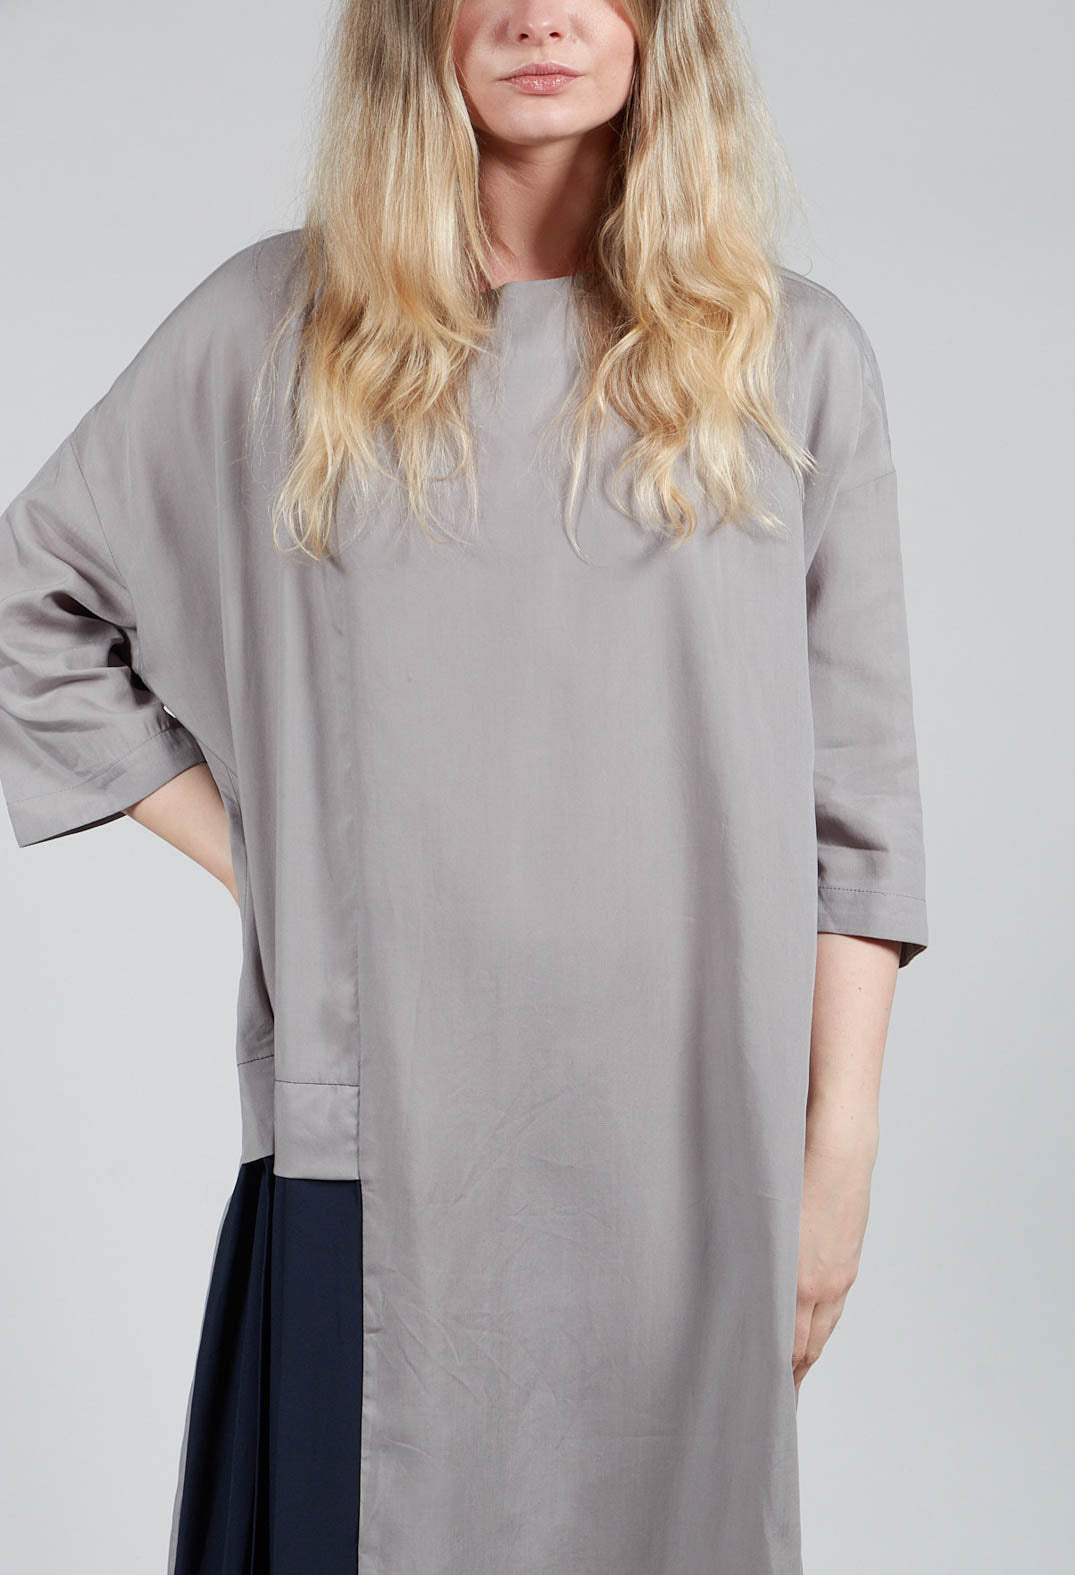 Loose Fit Dress with Off Centre Pleat Detail in Grey and Navy